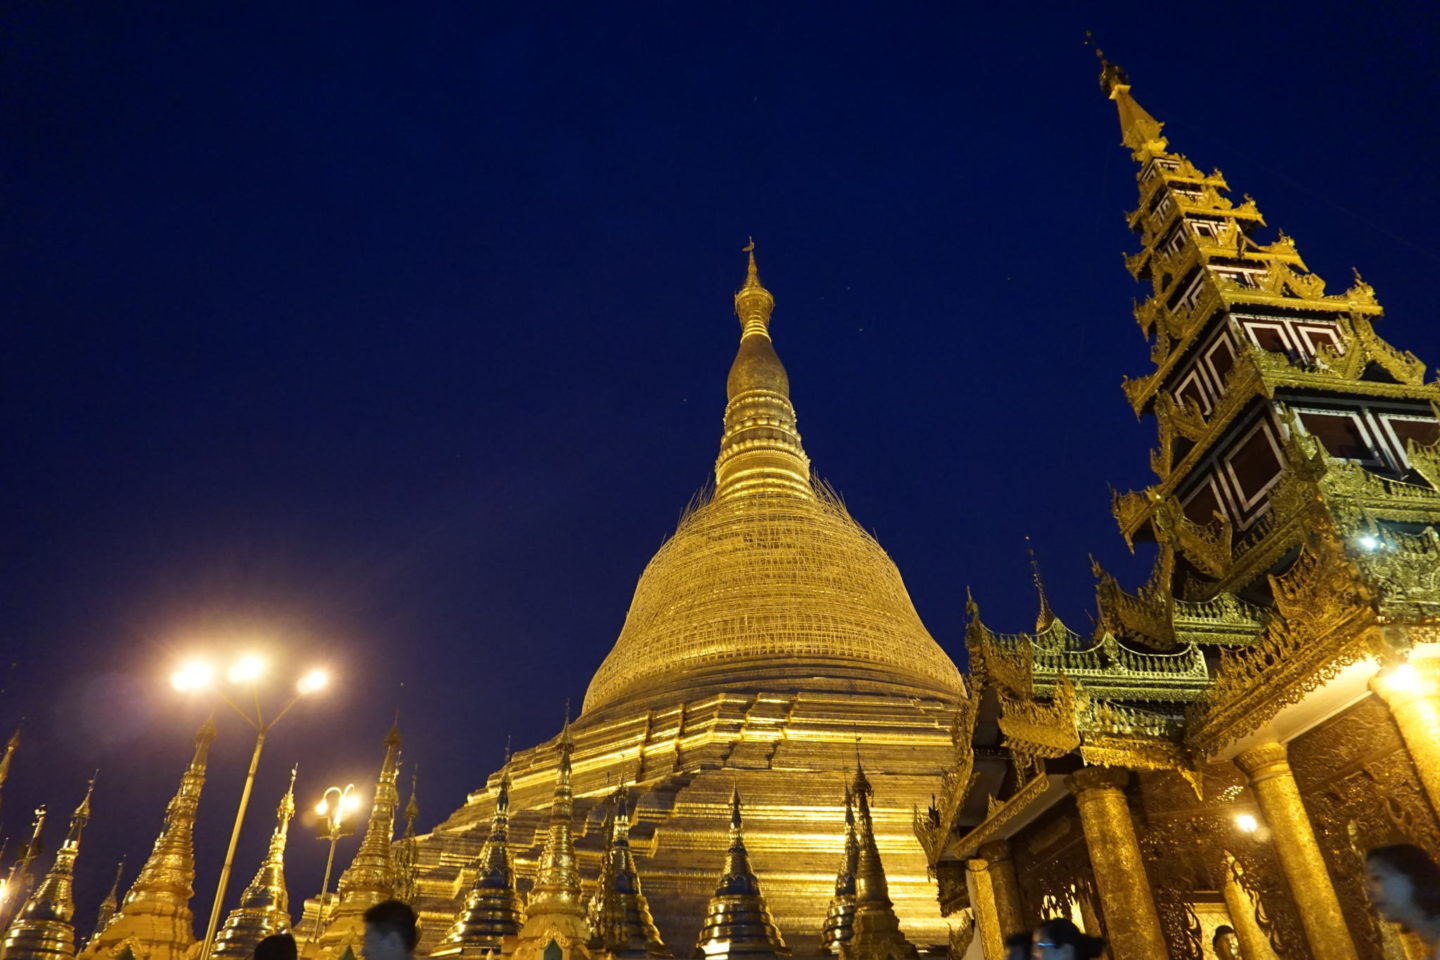 Basic Must-Knows for Your Trip to Myanmar